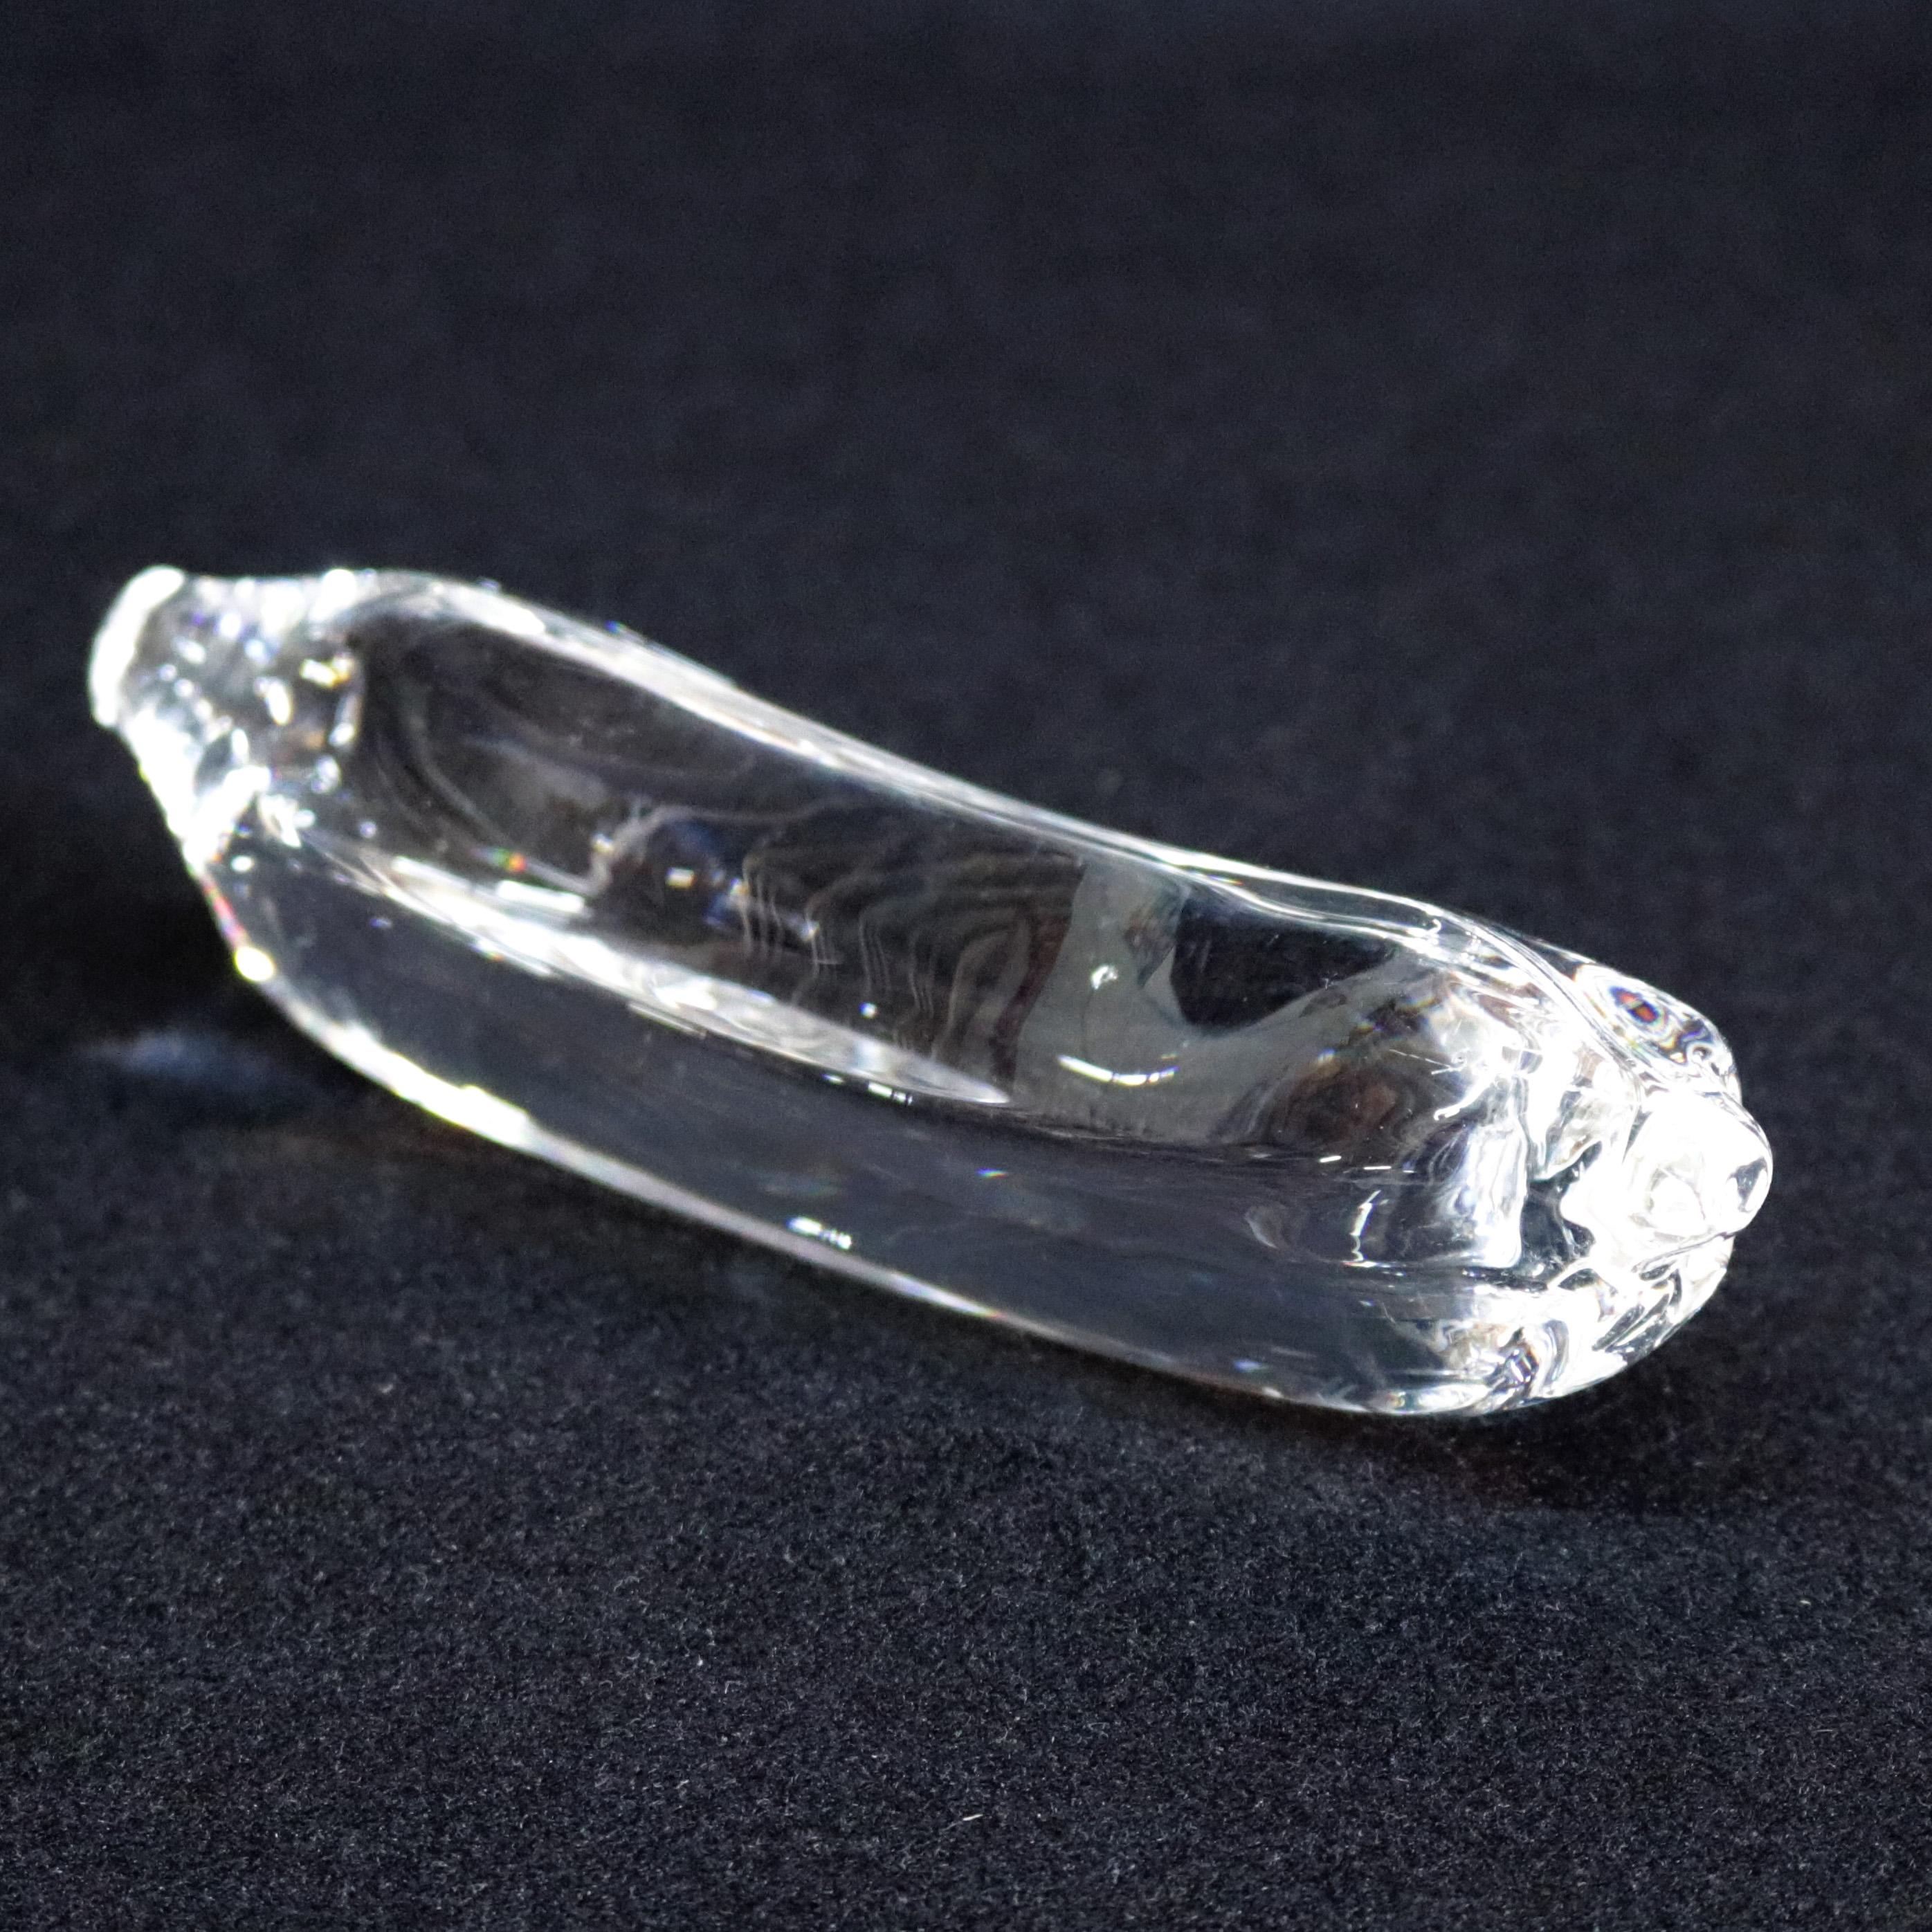 Midcentury Steuben figurative mouth blown crystal fruit sculptural paperweight features colorless art glass in full body form of Banana designed in the 1940s by Corning Museum of glass, New York, NY, signed on base, 20th century.

Measures - 2.5